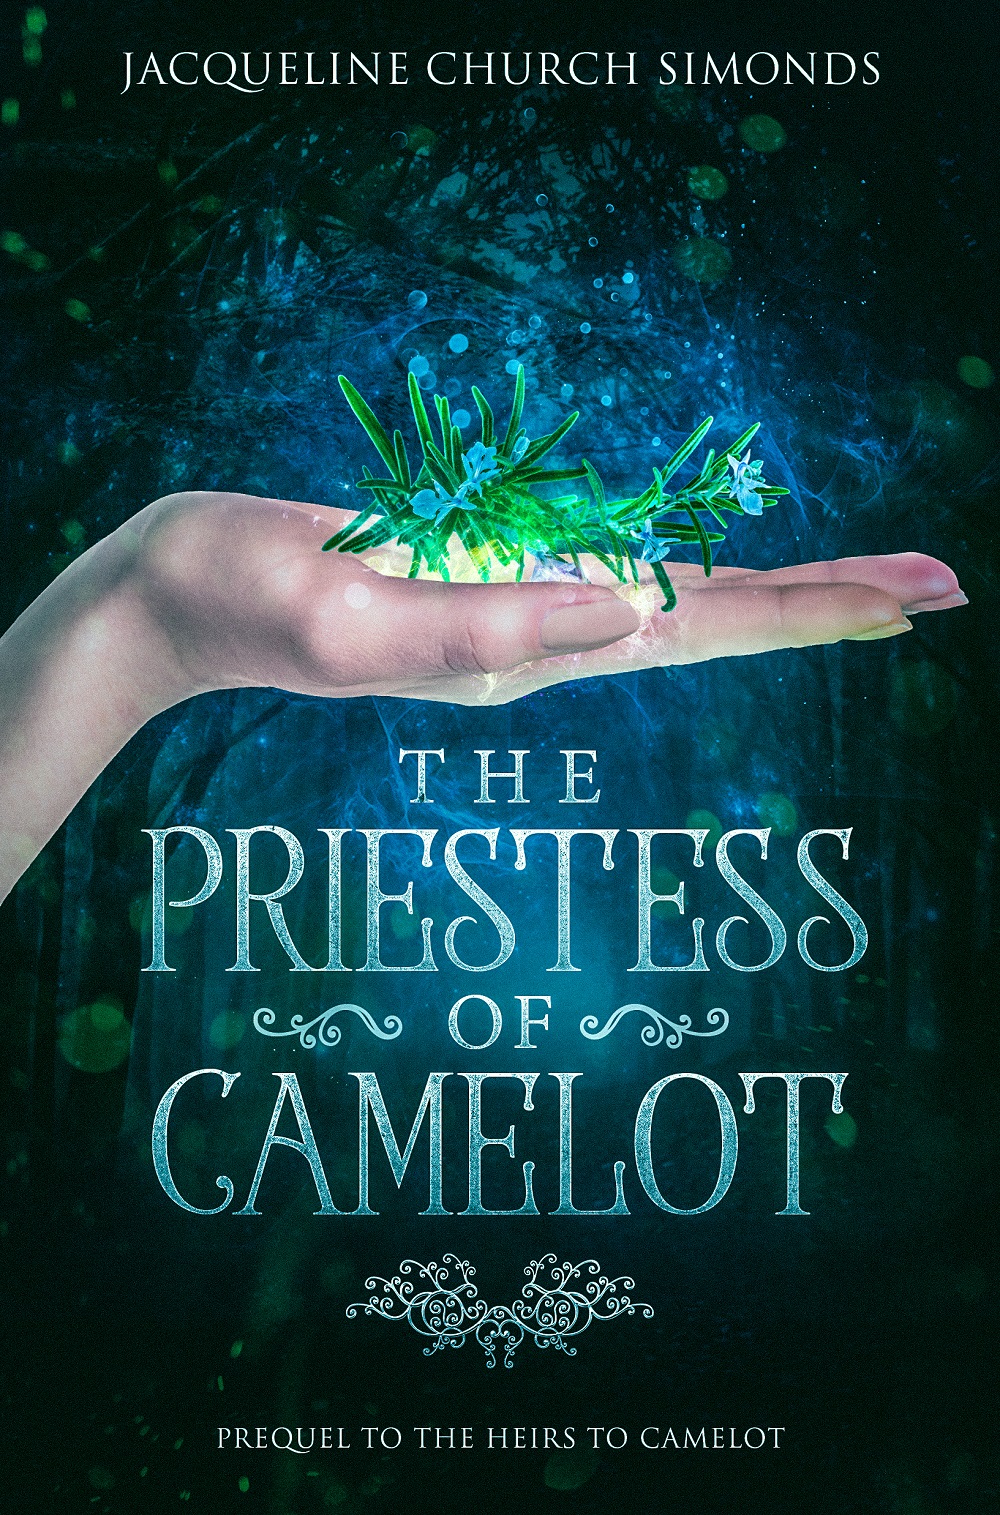 FREE: The Priestess of Camelot by Jacqueline Church Simonds